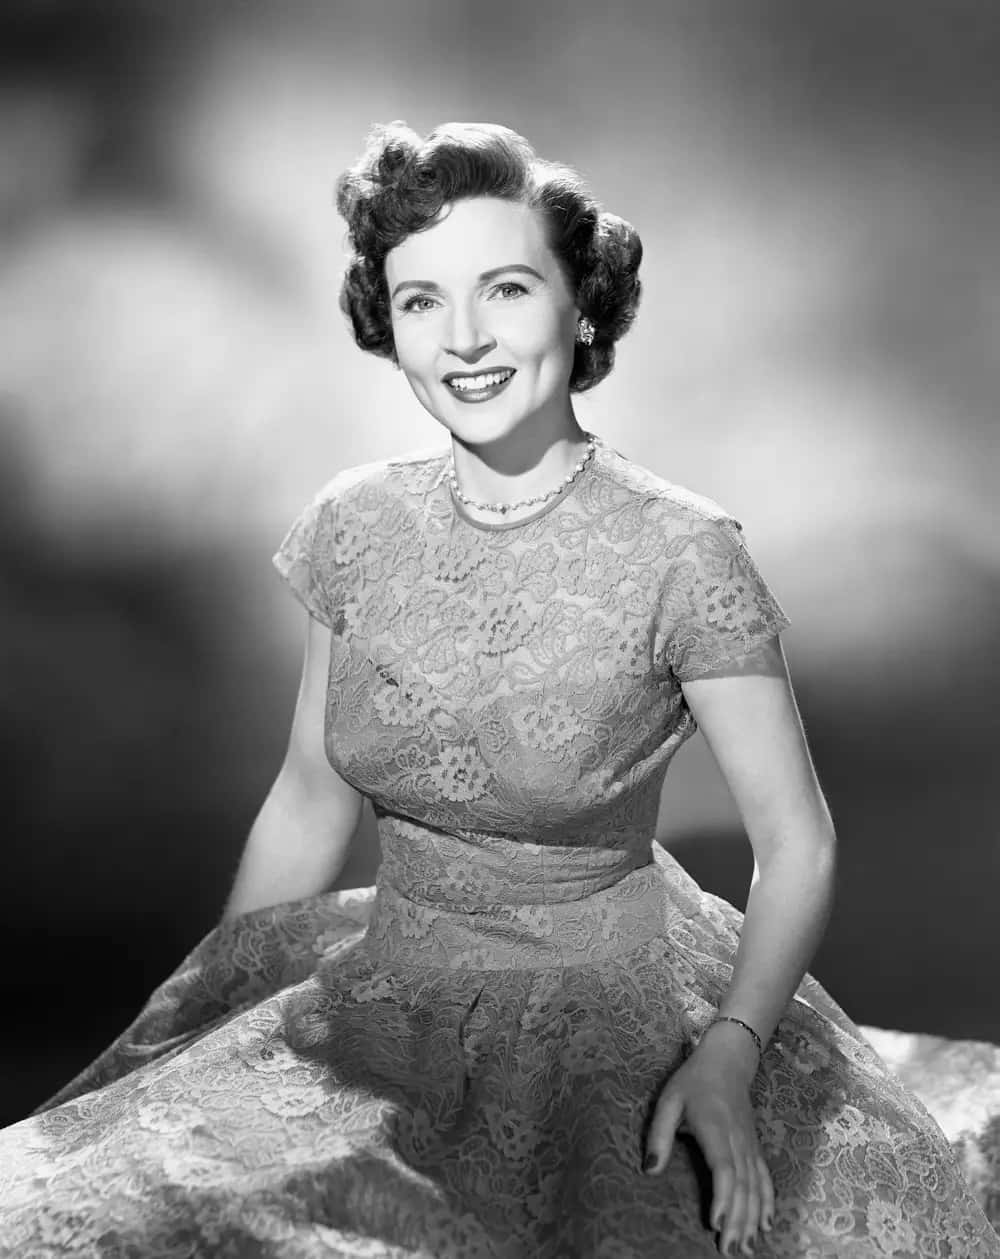 A Woman In A Dress Is Smiling In A Black And White Photo